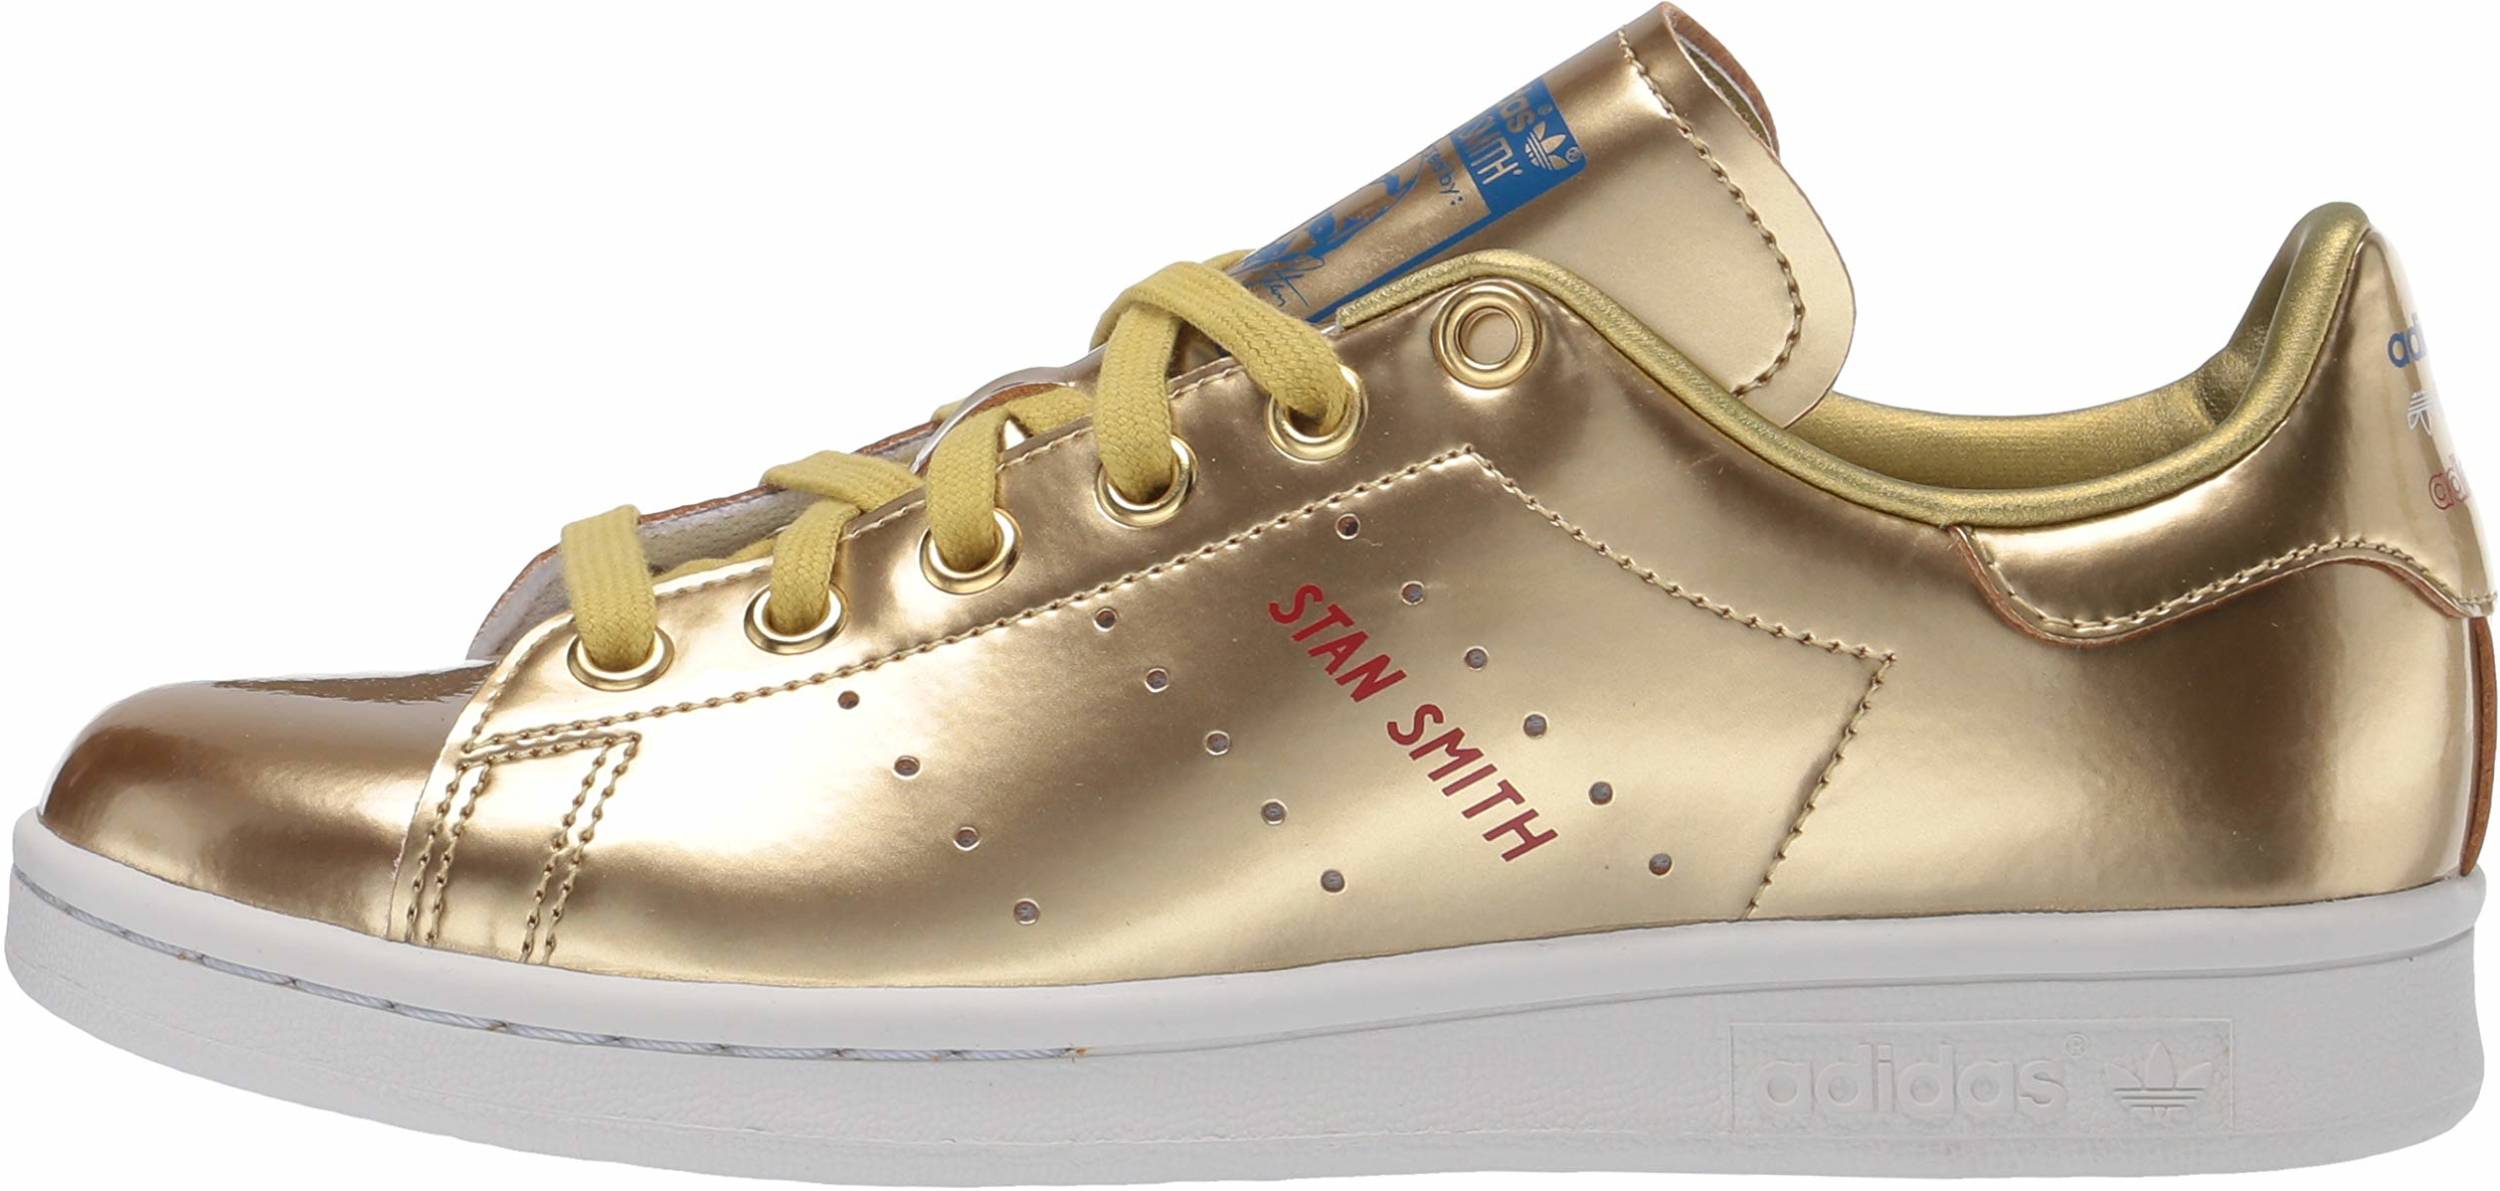 Save 32% on Gold Adidas Sneakers (5 